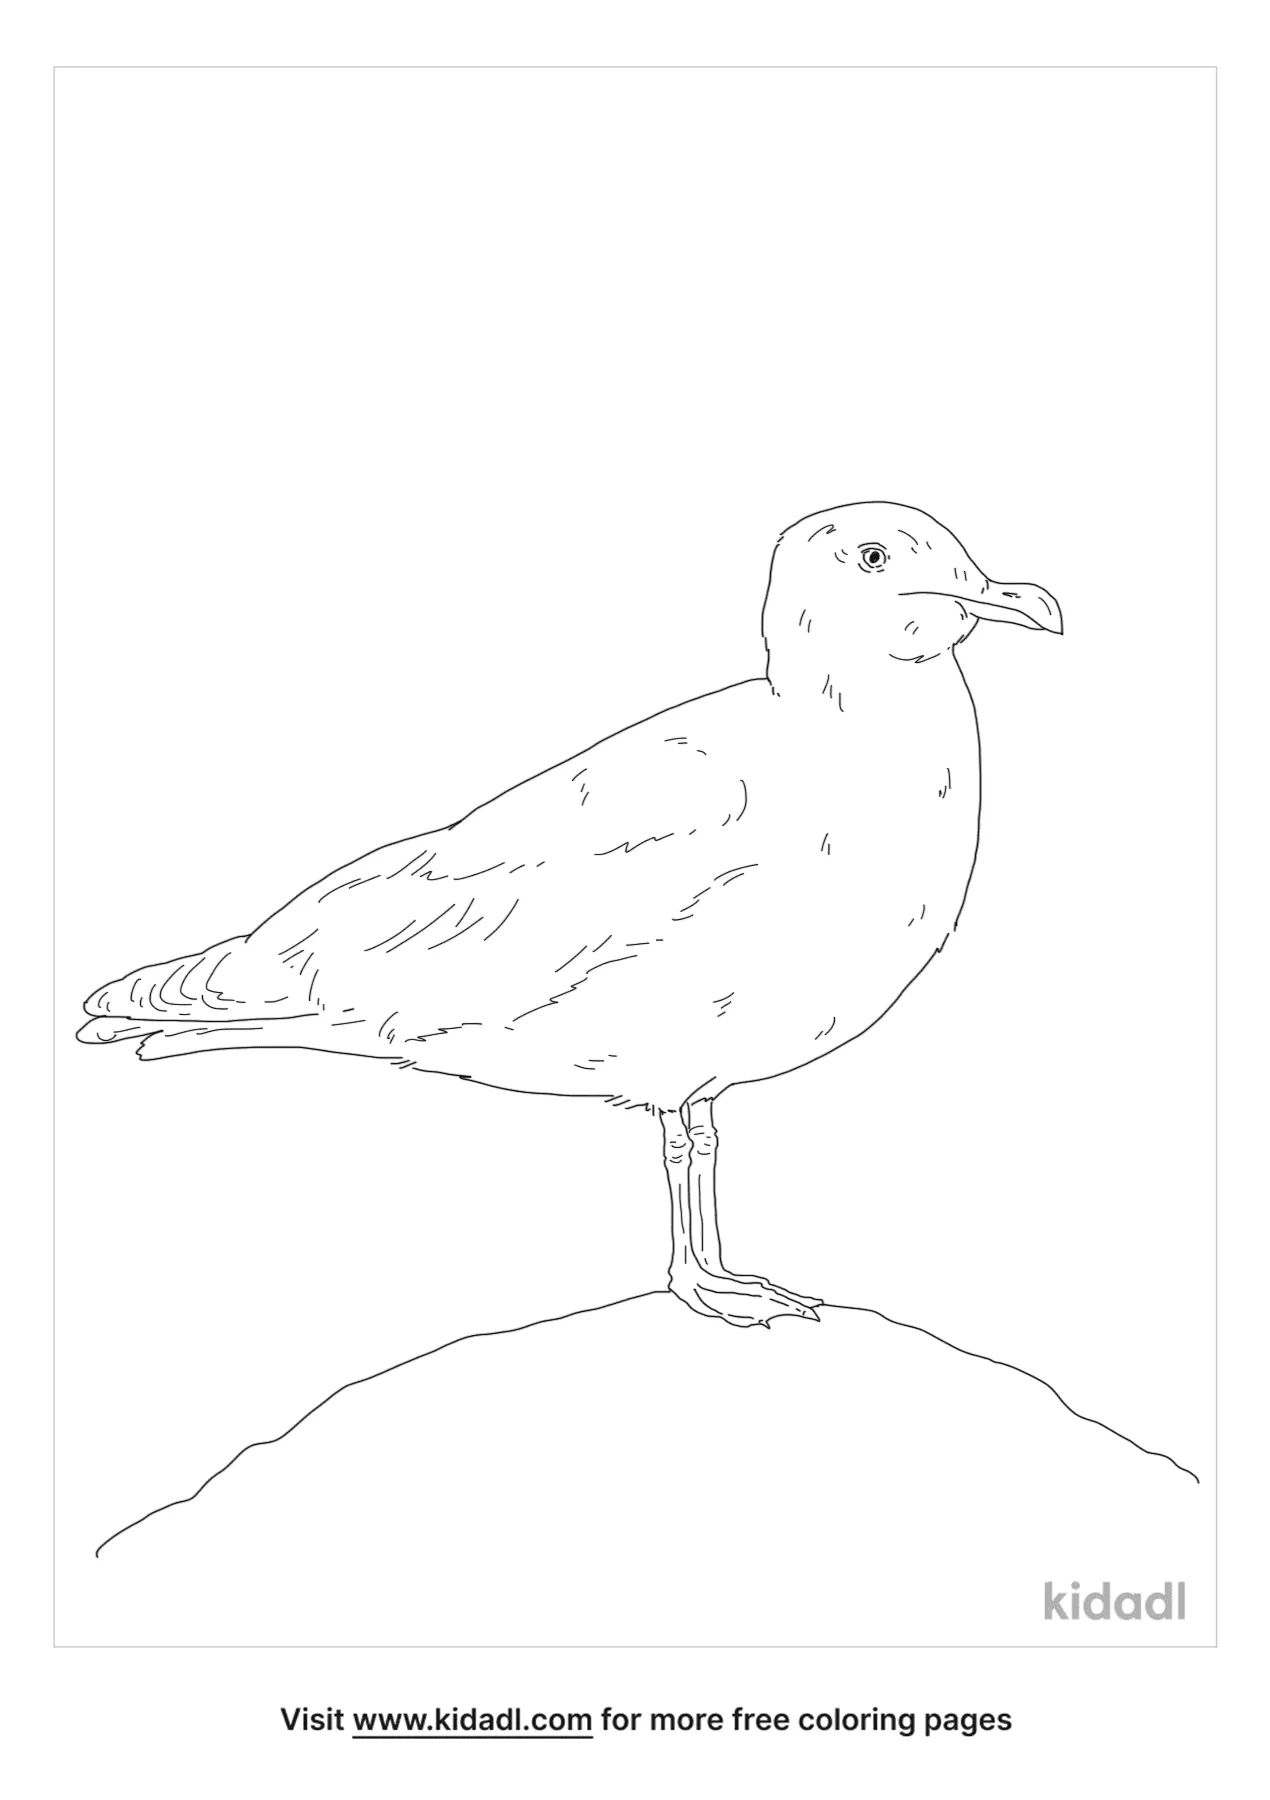 Iceland Gull Coloring Page